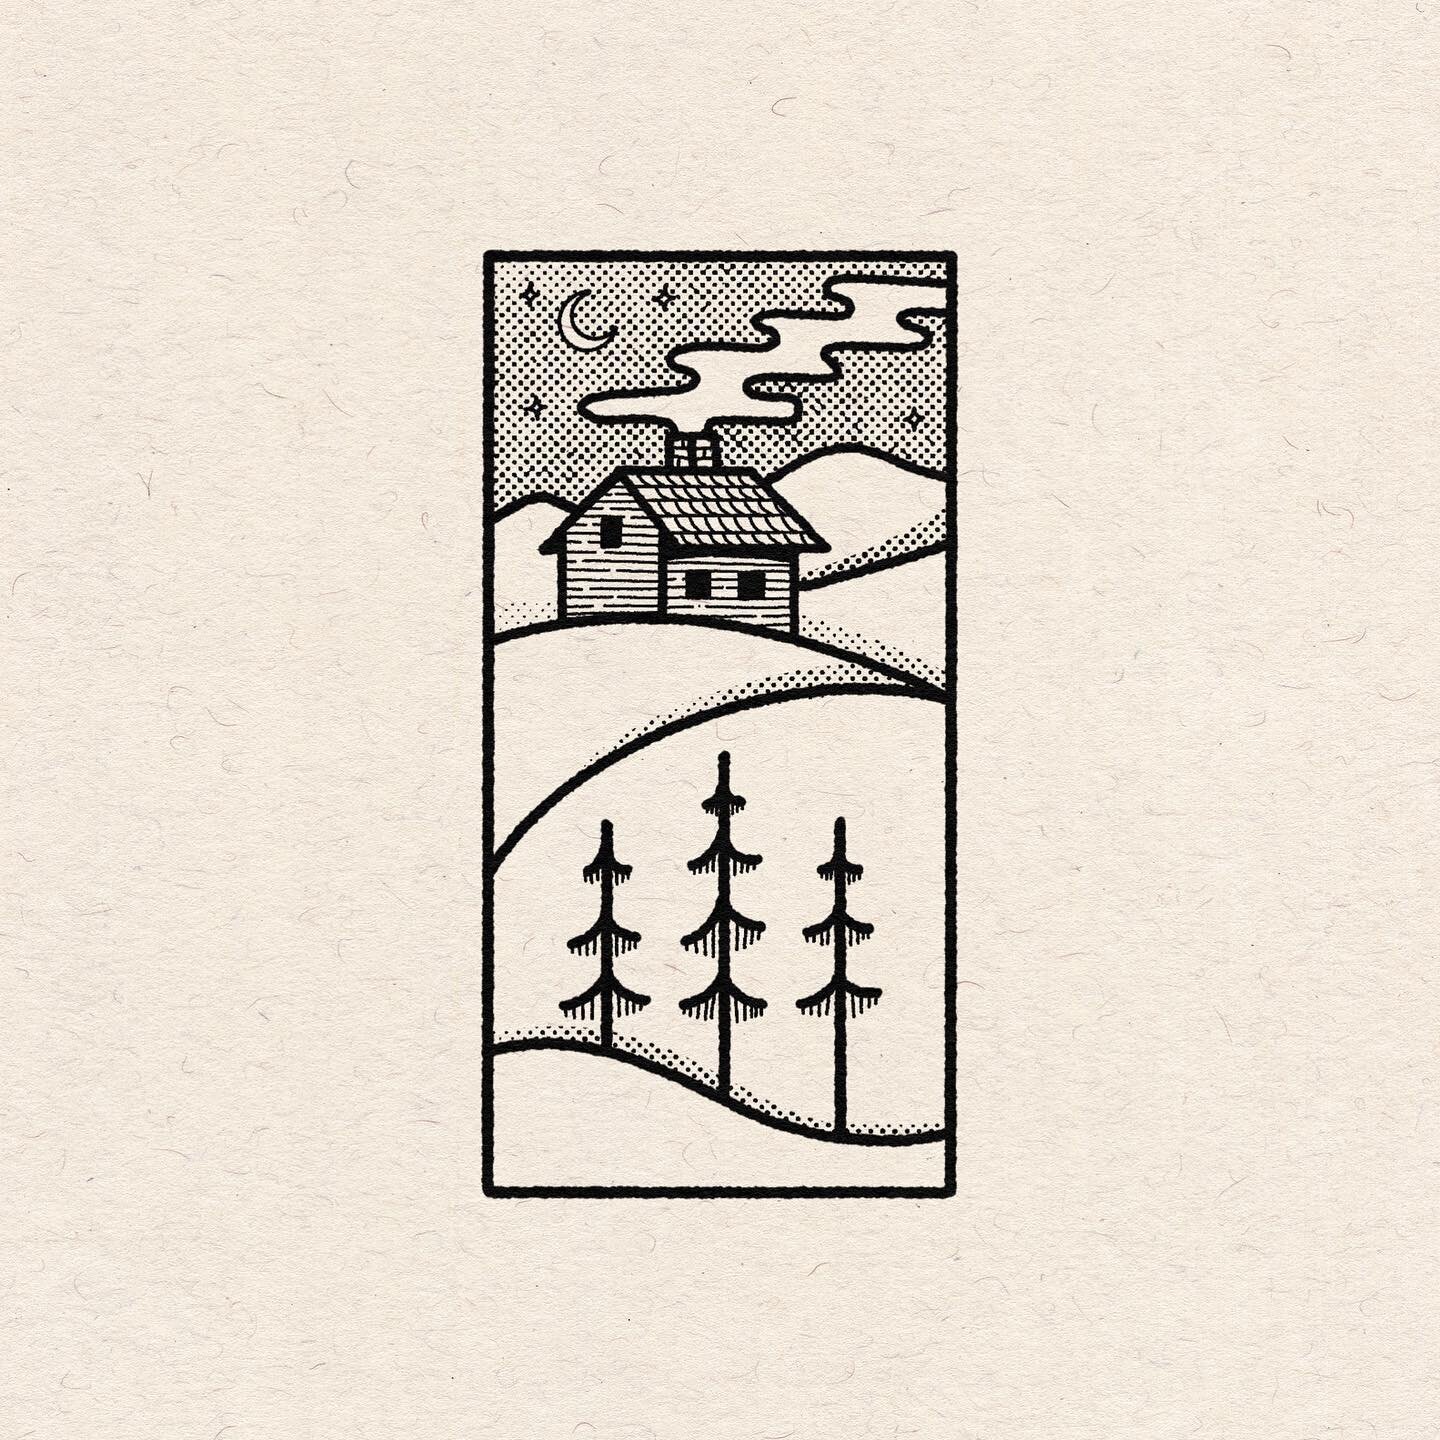 Always wishing I was somewhere in cabin, under a halftone sky 🌌 ✨
-
Shout out to the creators of the Beat Tones brush pack available from @truegrittexturesupply 🙏
⠀
⠀
⠀
⠀
⠀
⠀
#halftoneart #truegrittexturesupply #cabin #natureart #penandinkart #digi